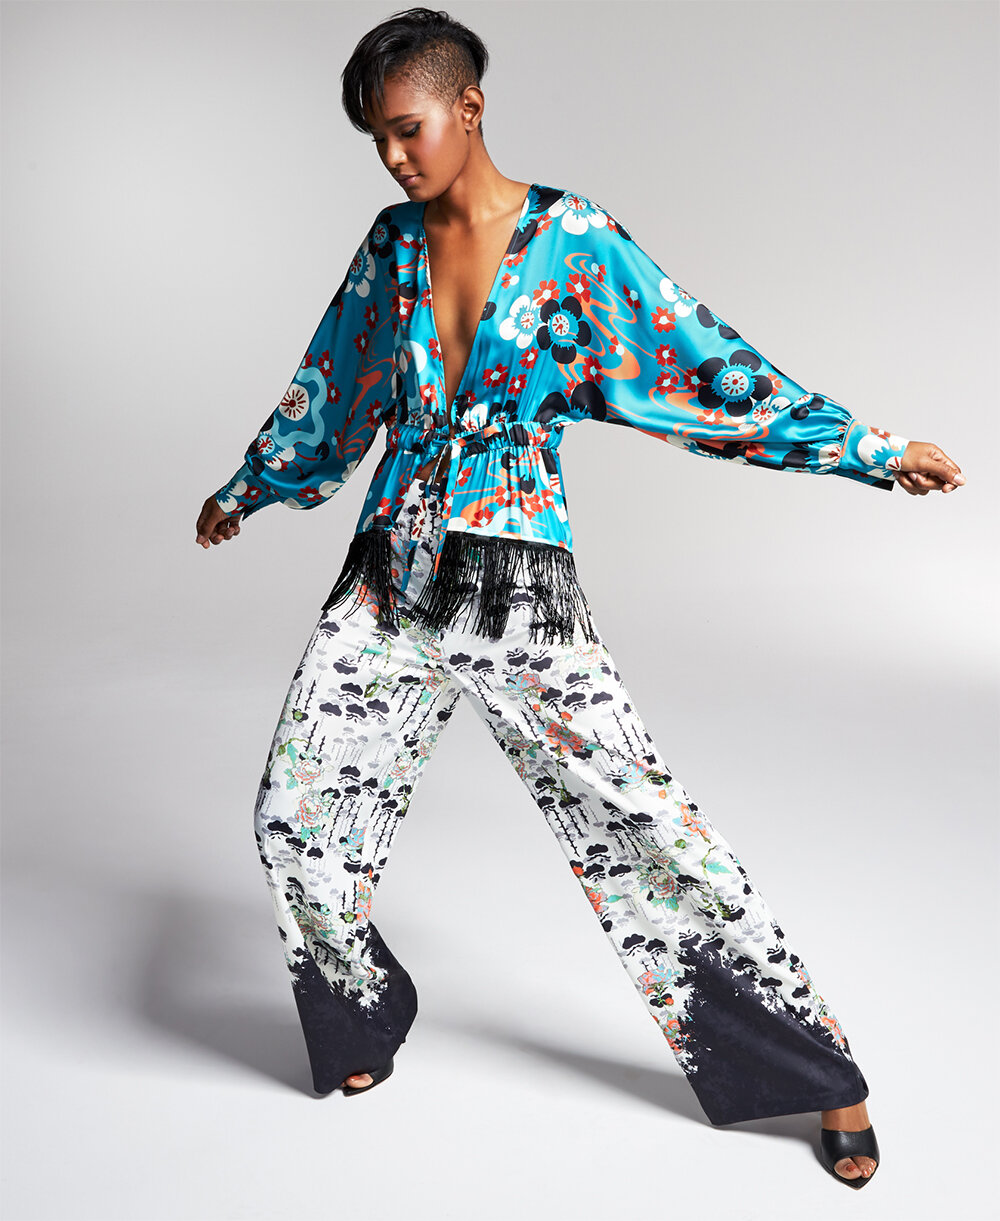 Zerina Akers And Ouigi Theodore Headline MACY’s “Icons of Style” — PAGE ...